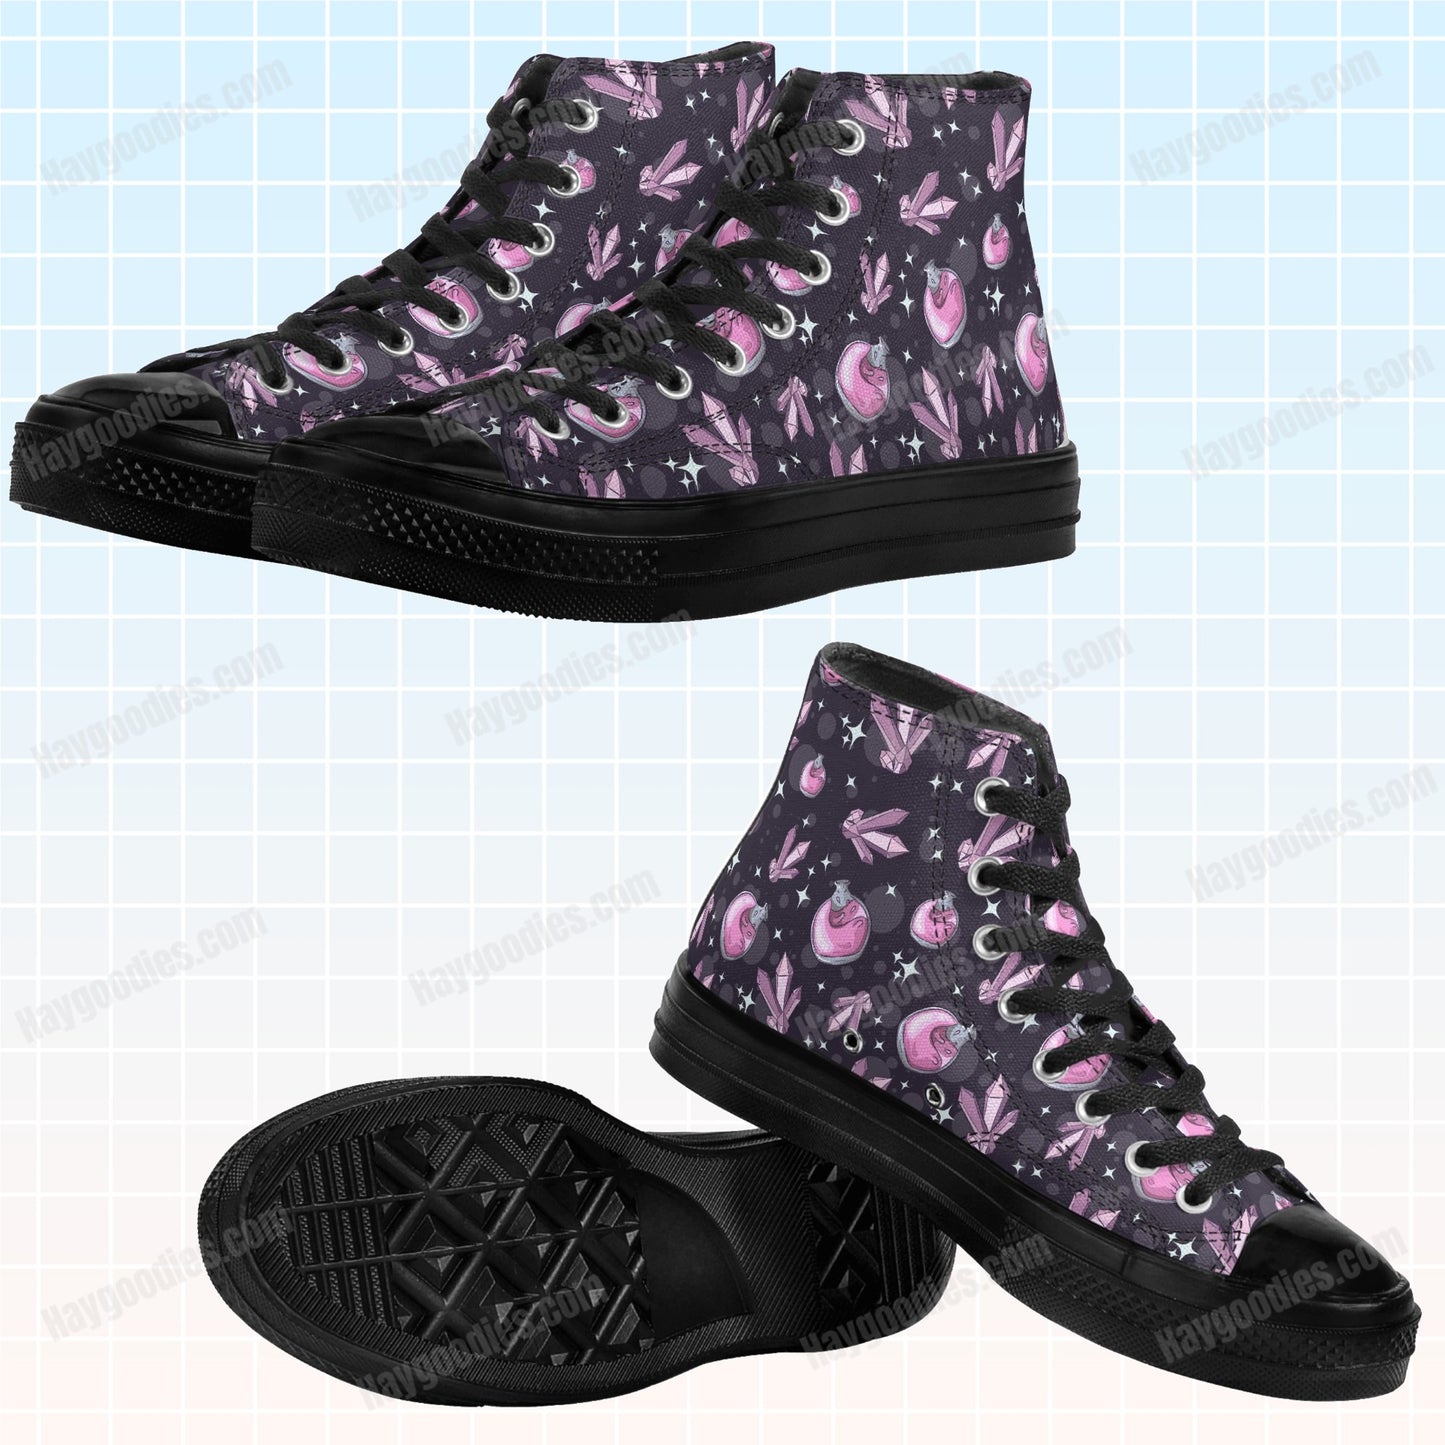 Potions and Crystals Pattern Black High Top Canvas Shoes-Men's Sizes